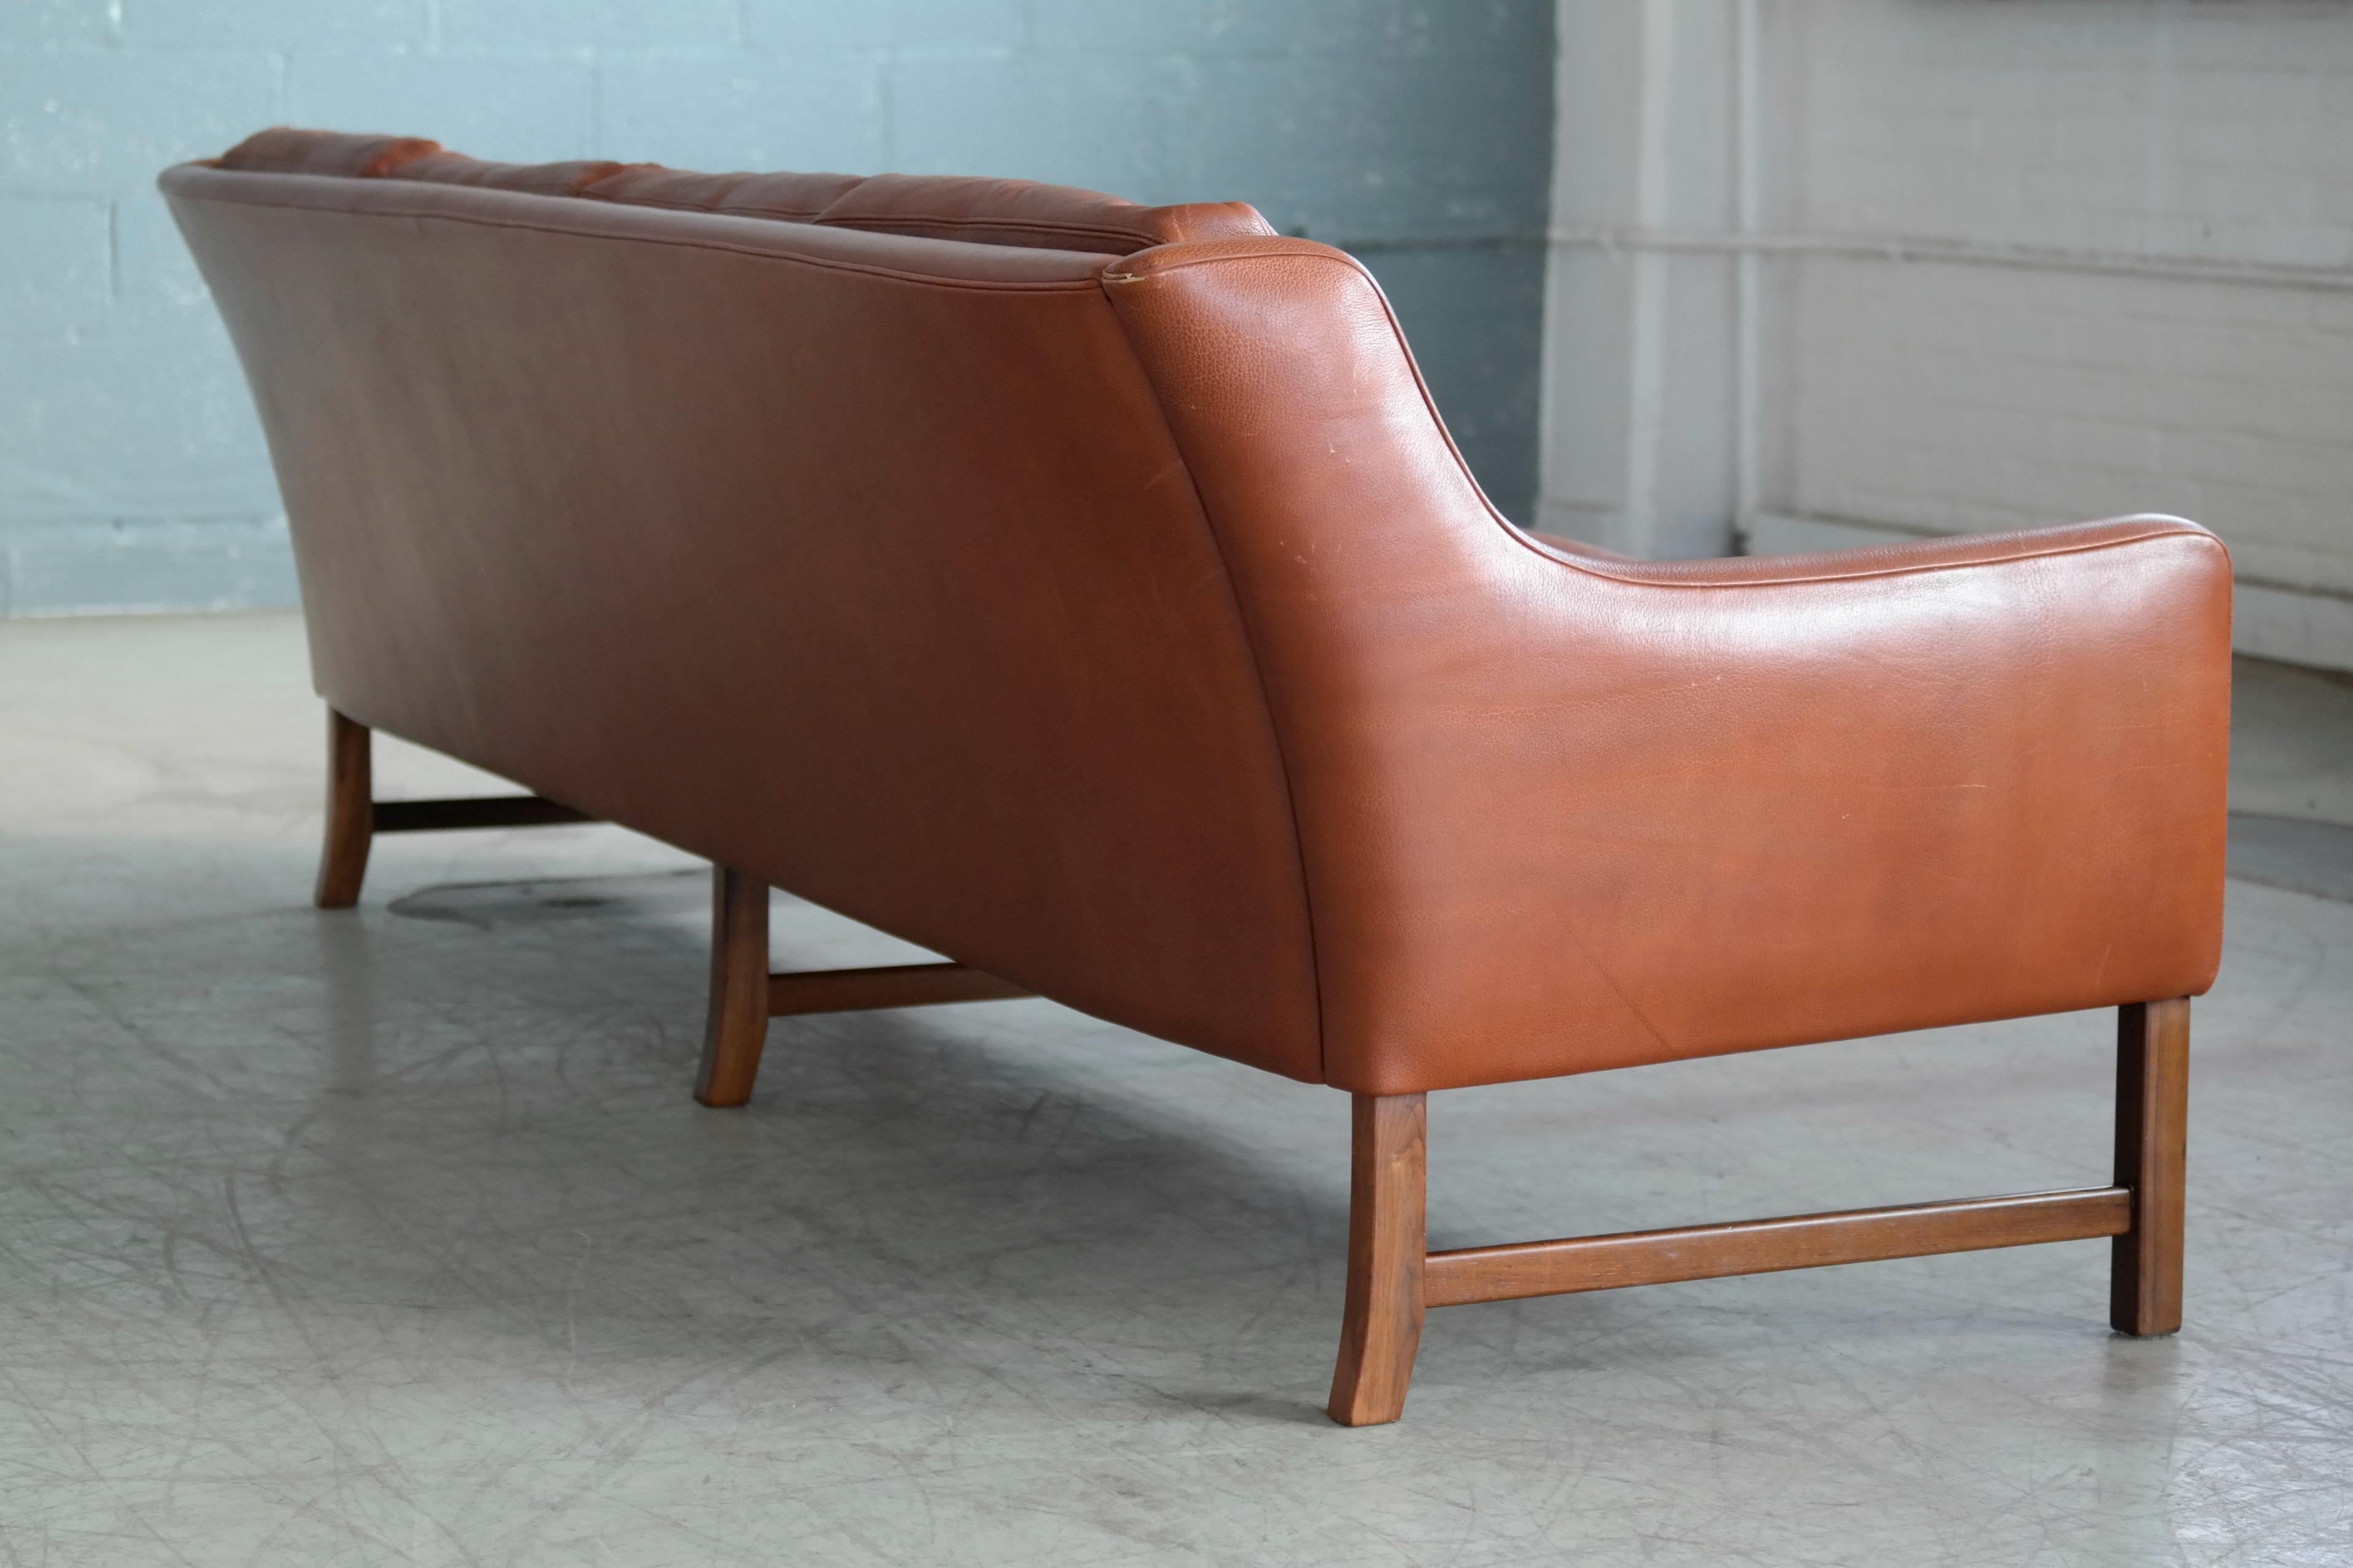 Mid-Century Modern Four-Seat Sofa in Cognac Leather and Rosewood by Fredrik Kayser for Vatne Norway